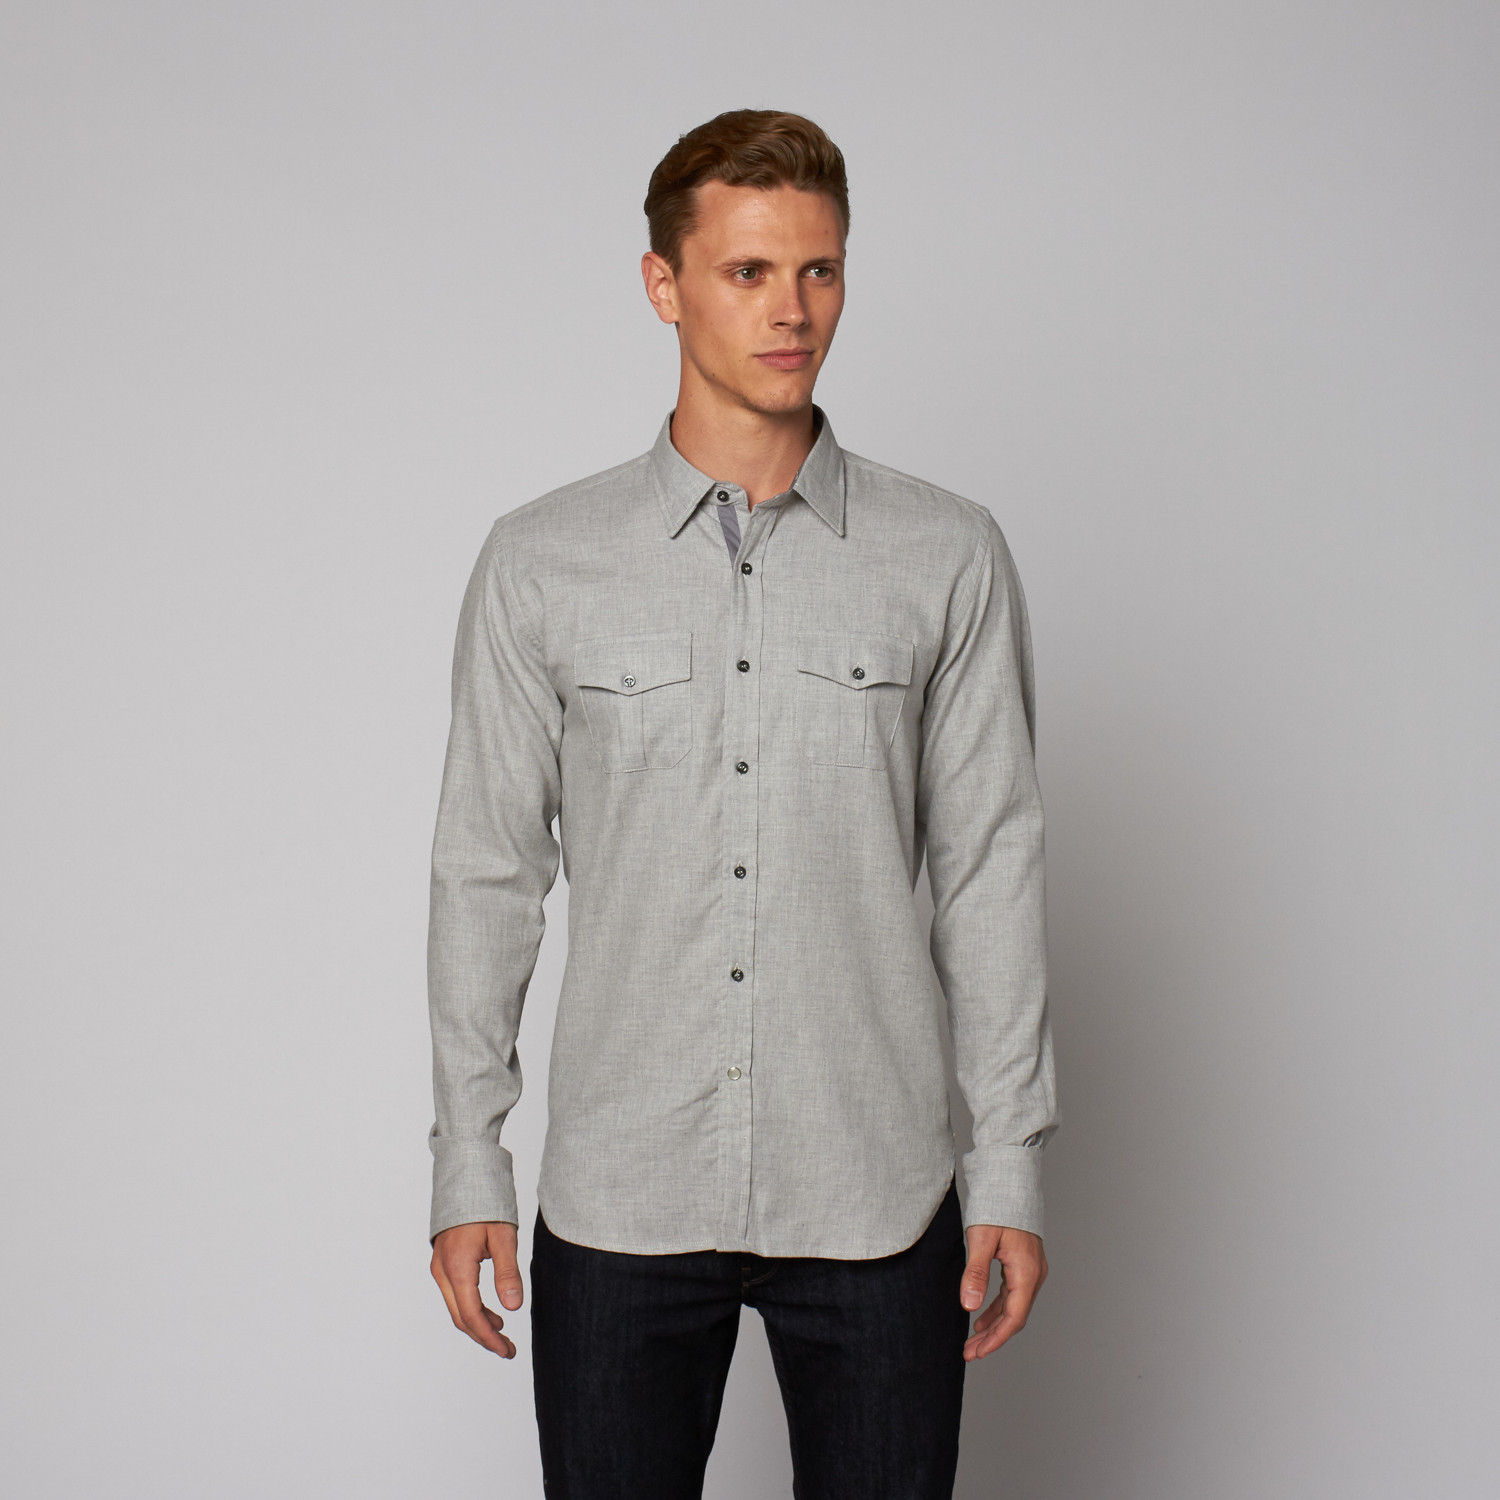 Double Pocket Button Up Shirt // Grey (S) - Jerry Kaye - Touch of Modern